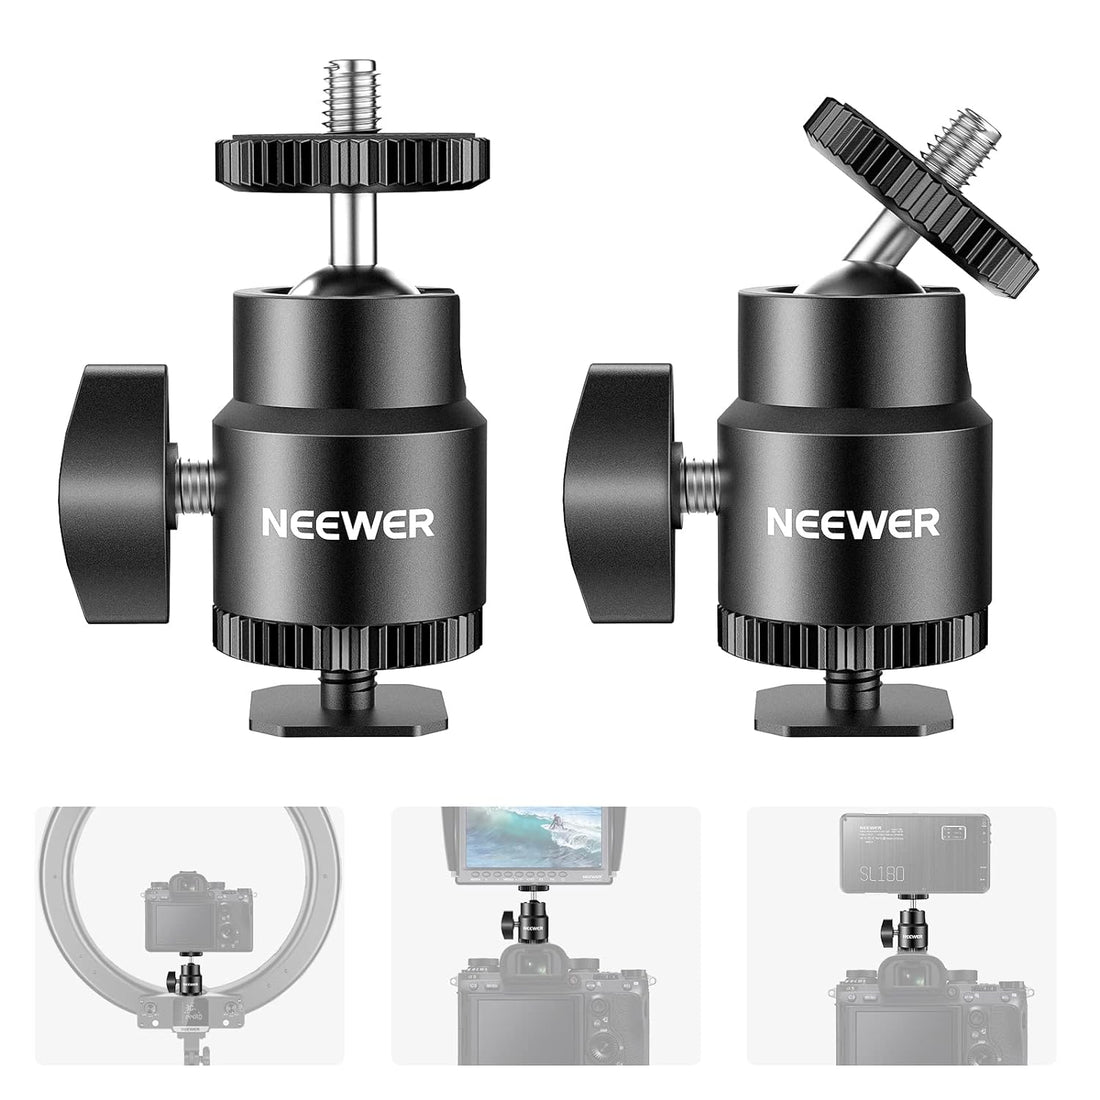 Neewer 1/4â€ Camera Hot Shoe Mount with Additional 1/4â€ Screw 4-Pack, Mini Ball Head Cold Shoe Mount Adapter for Cameras, Camcorders, Smart Phone, Video Light, Microphone, Ring Light - ST36